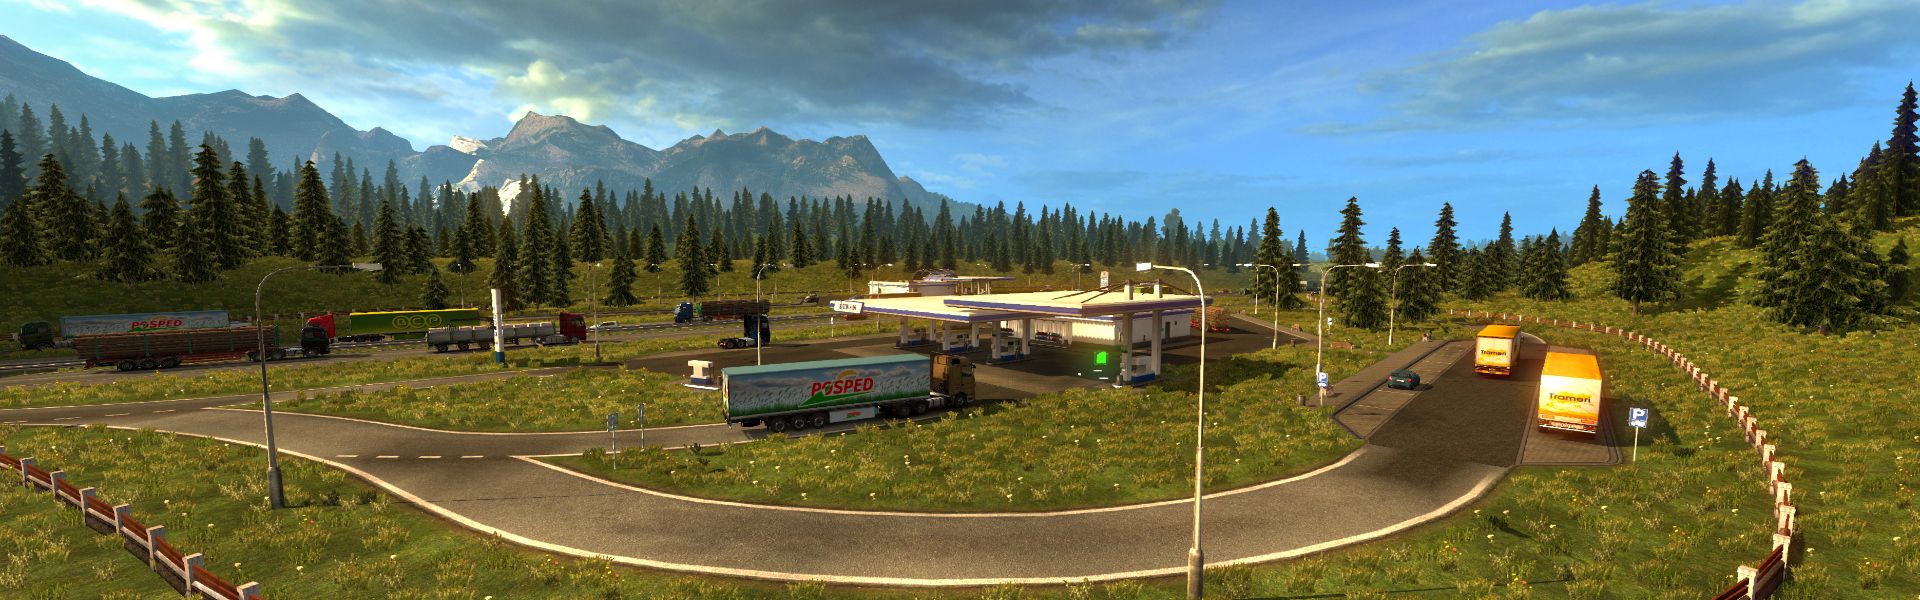 euro truck simulator 2 dlc going east activation key free